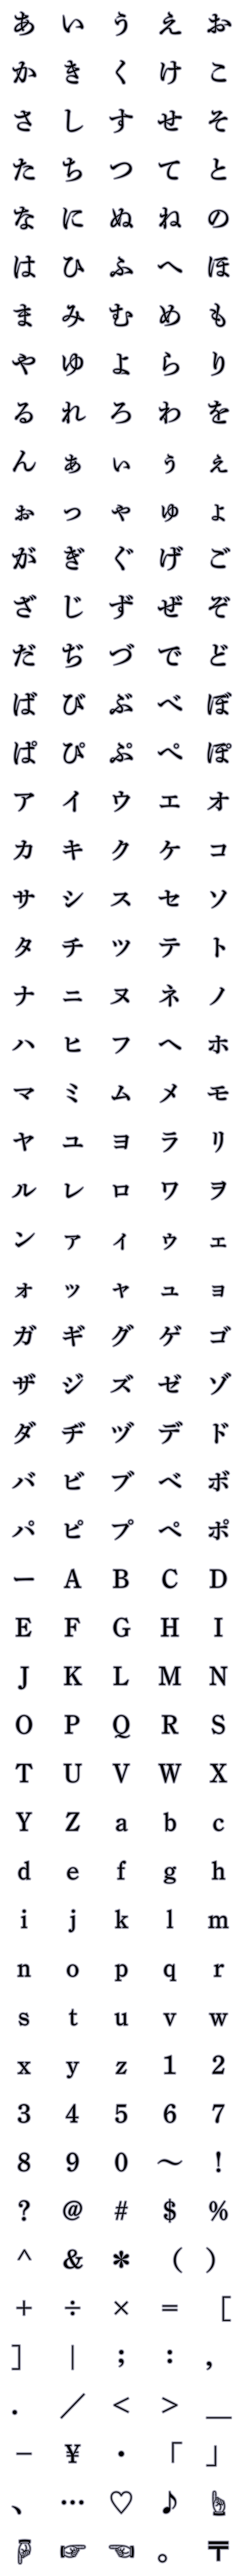 [LINE絵文字]秀英体でデコ文字「秀英四号かな」の画像一覧